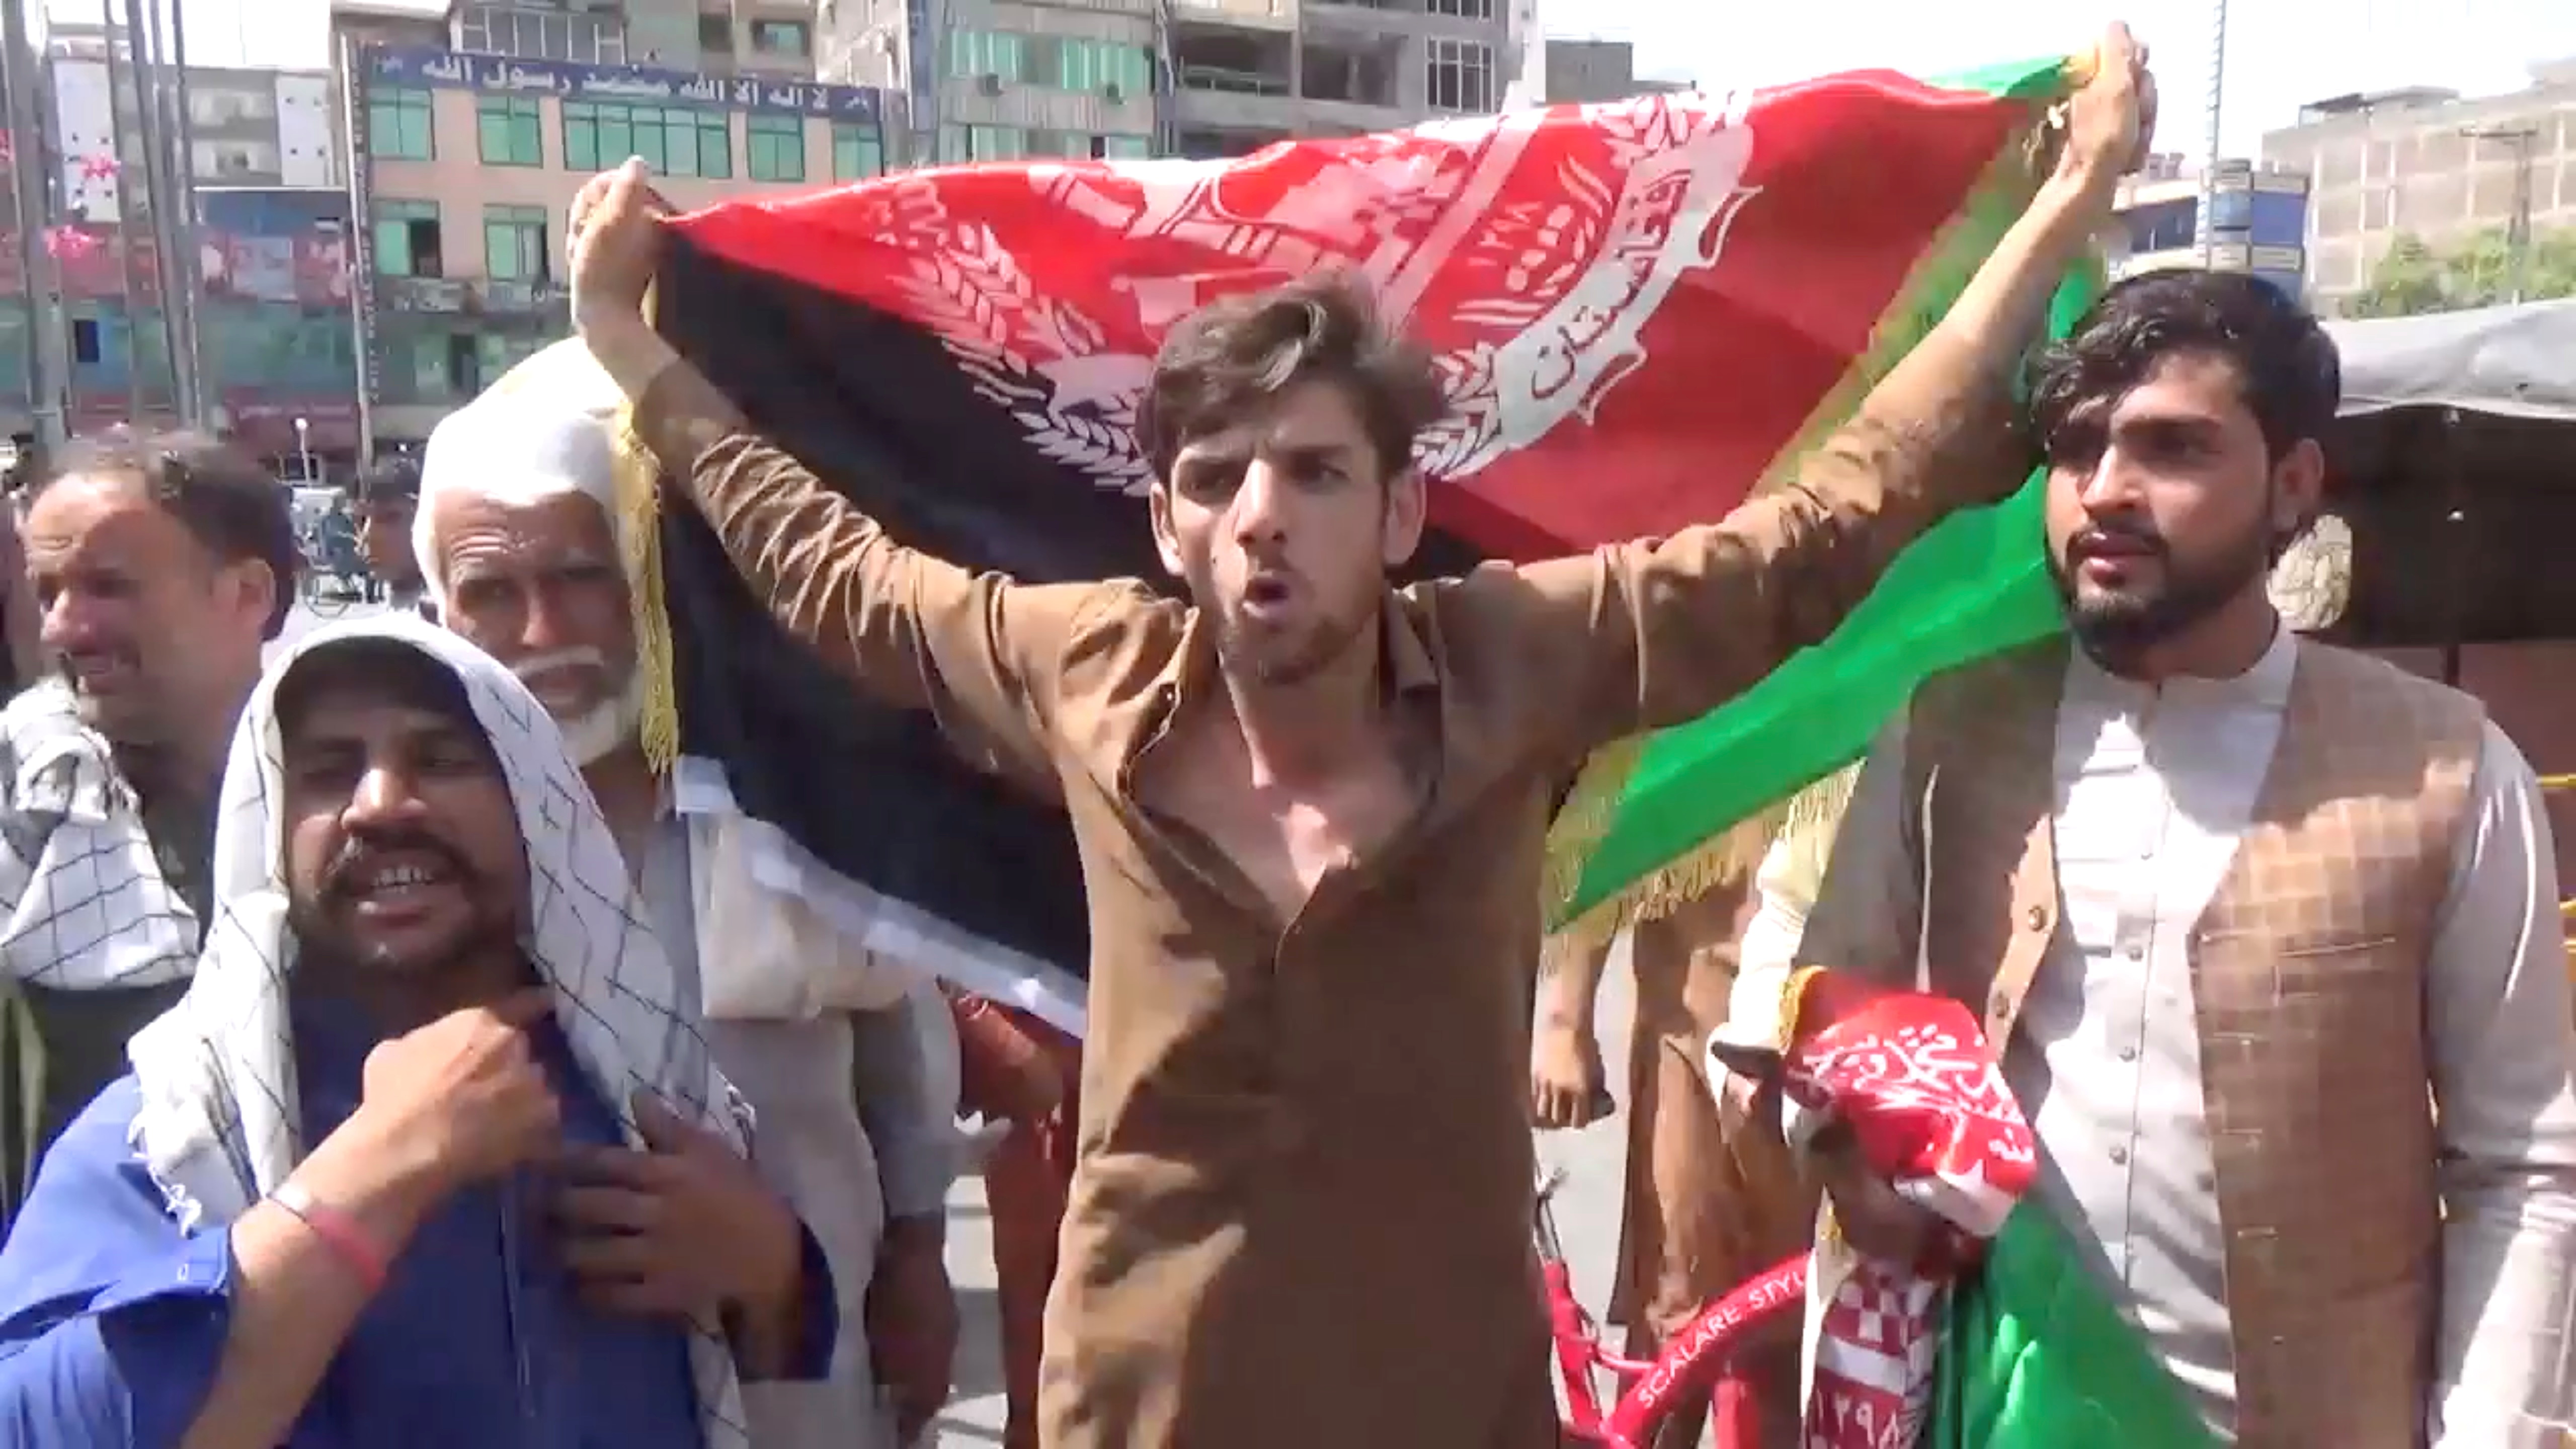 People carry Afghan flags as they take part in an anti-Taliban protest in Jalalabad, Afghanistan August 18, 2021 in this screen grab taken from a video. Pajhwok Afghan News/Handout via REUTERS